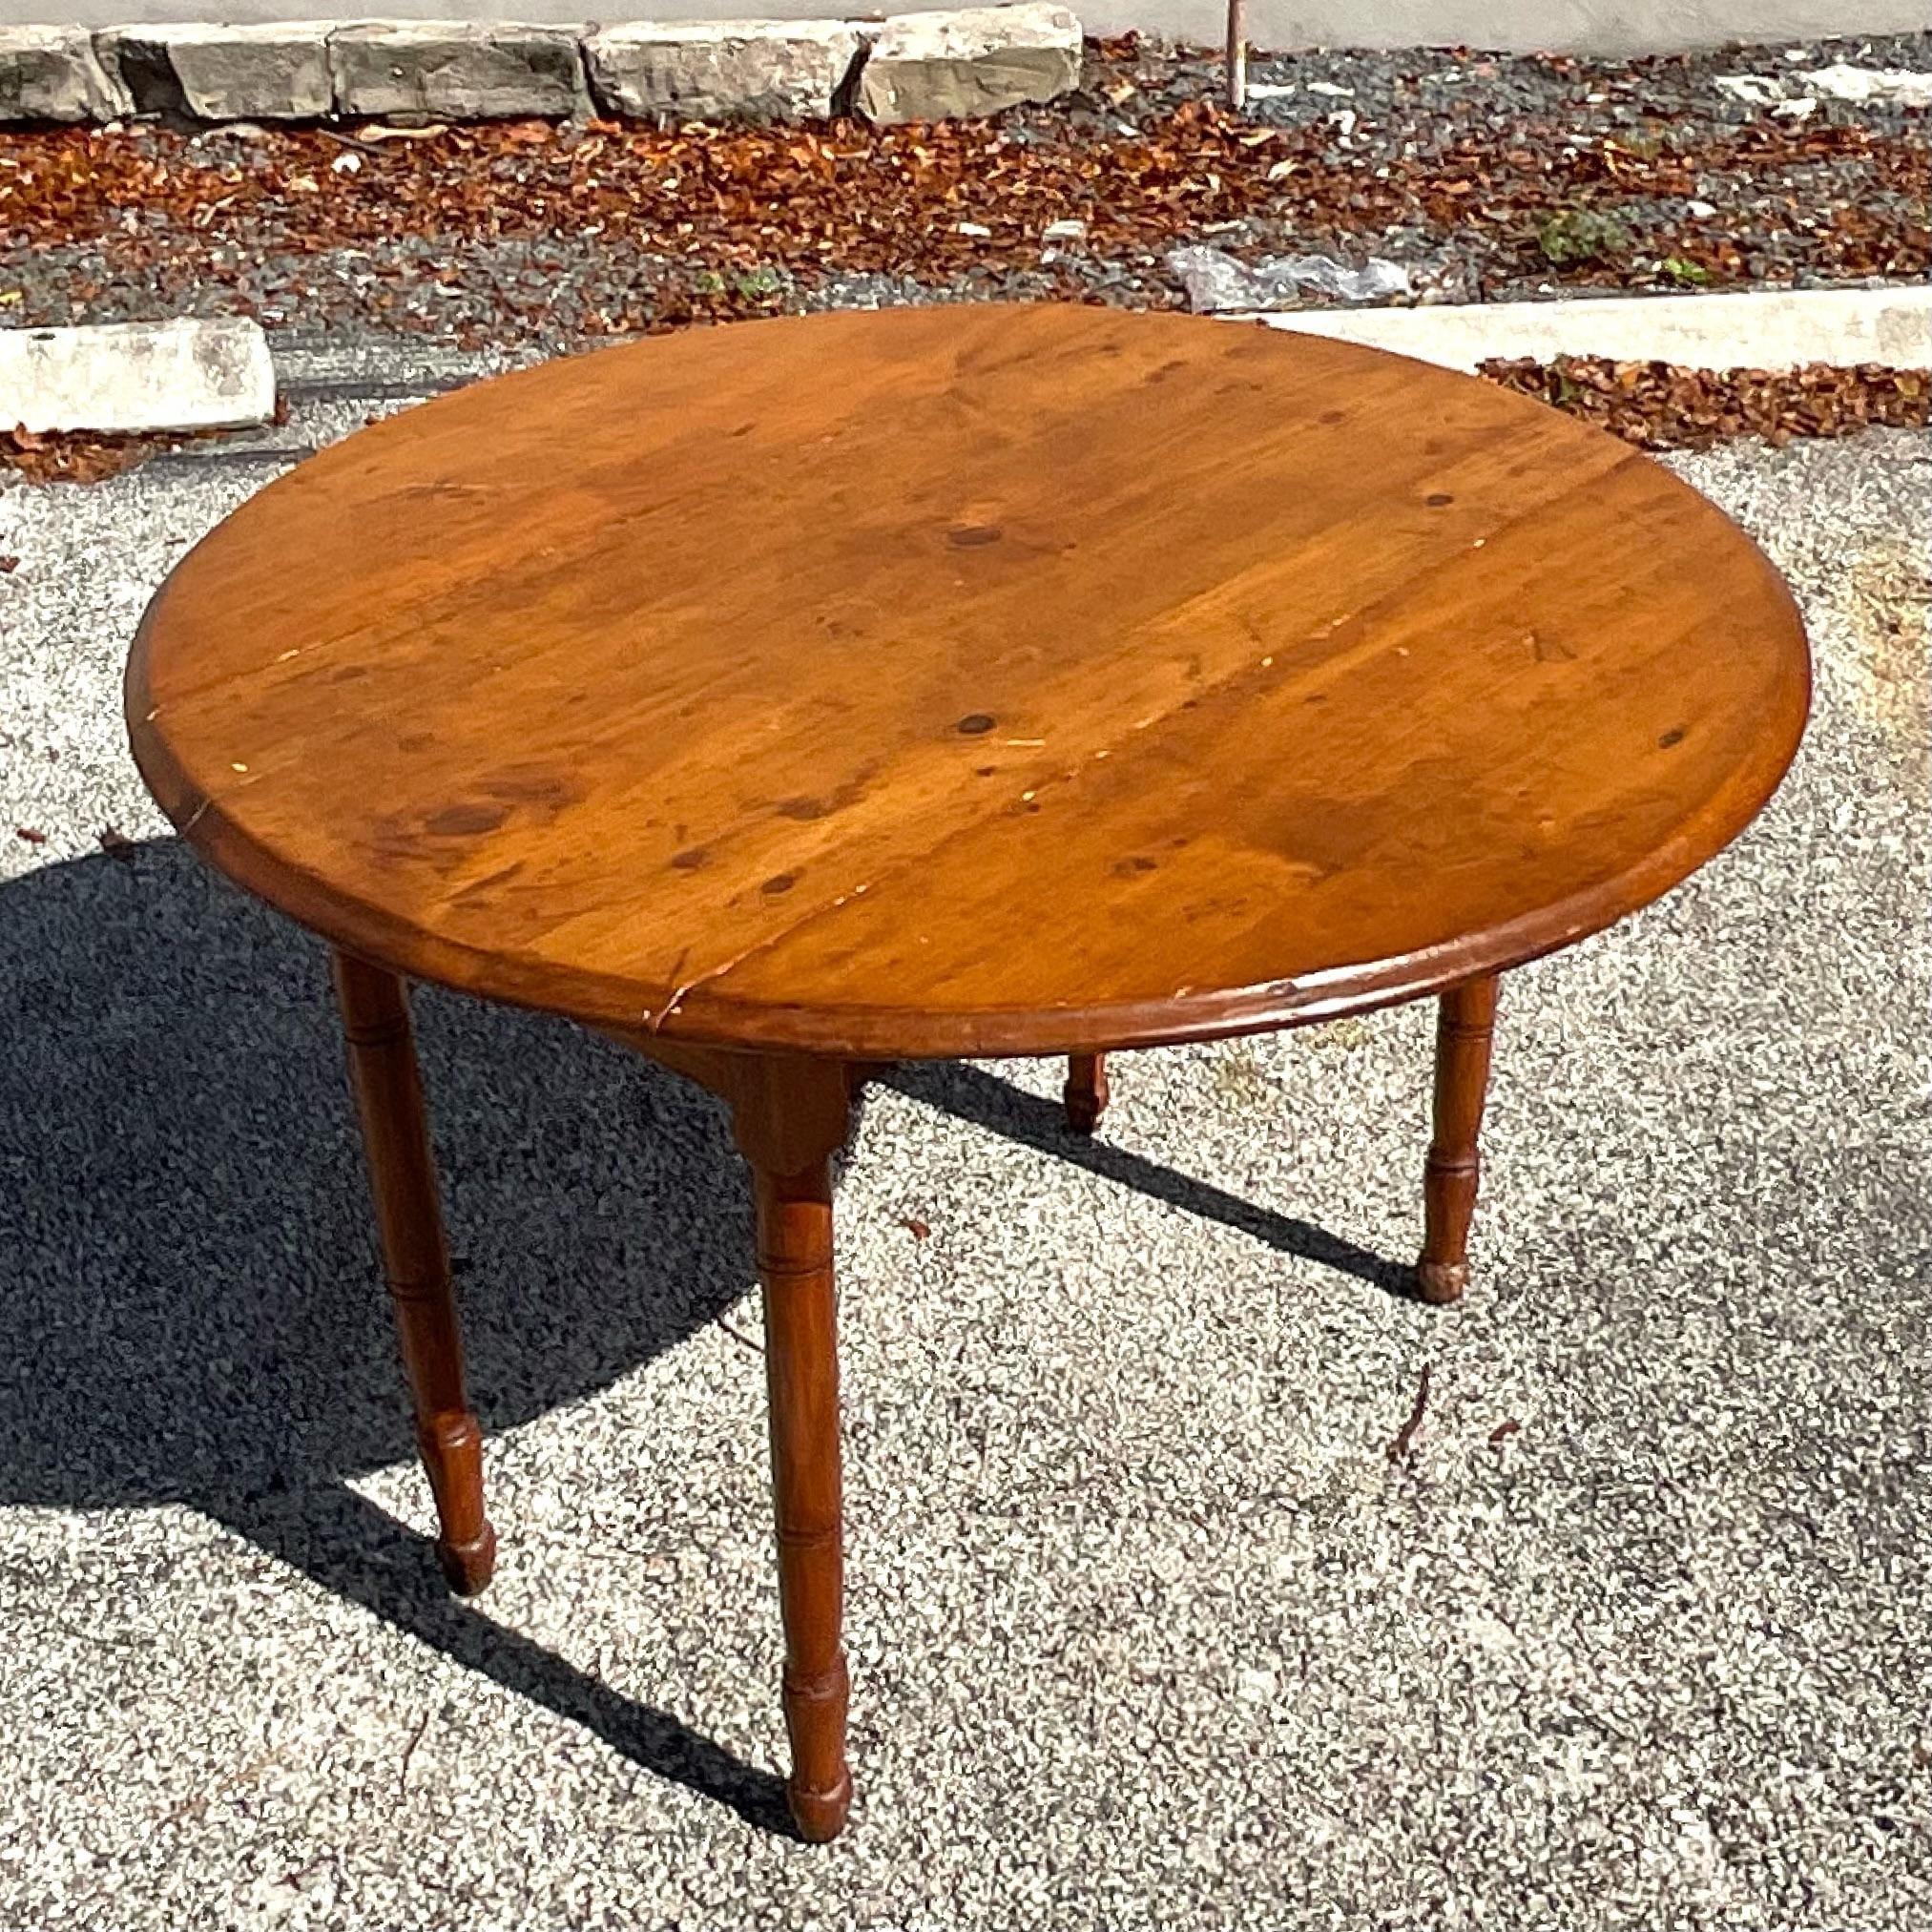 Early 20th Century Vintage Turned Leg Drop Leaf Table For Sale 1